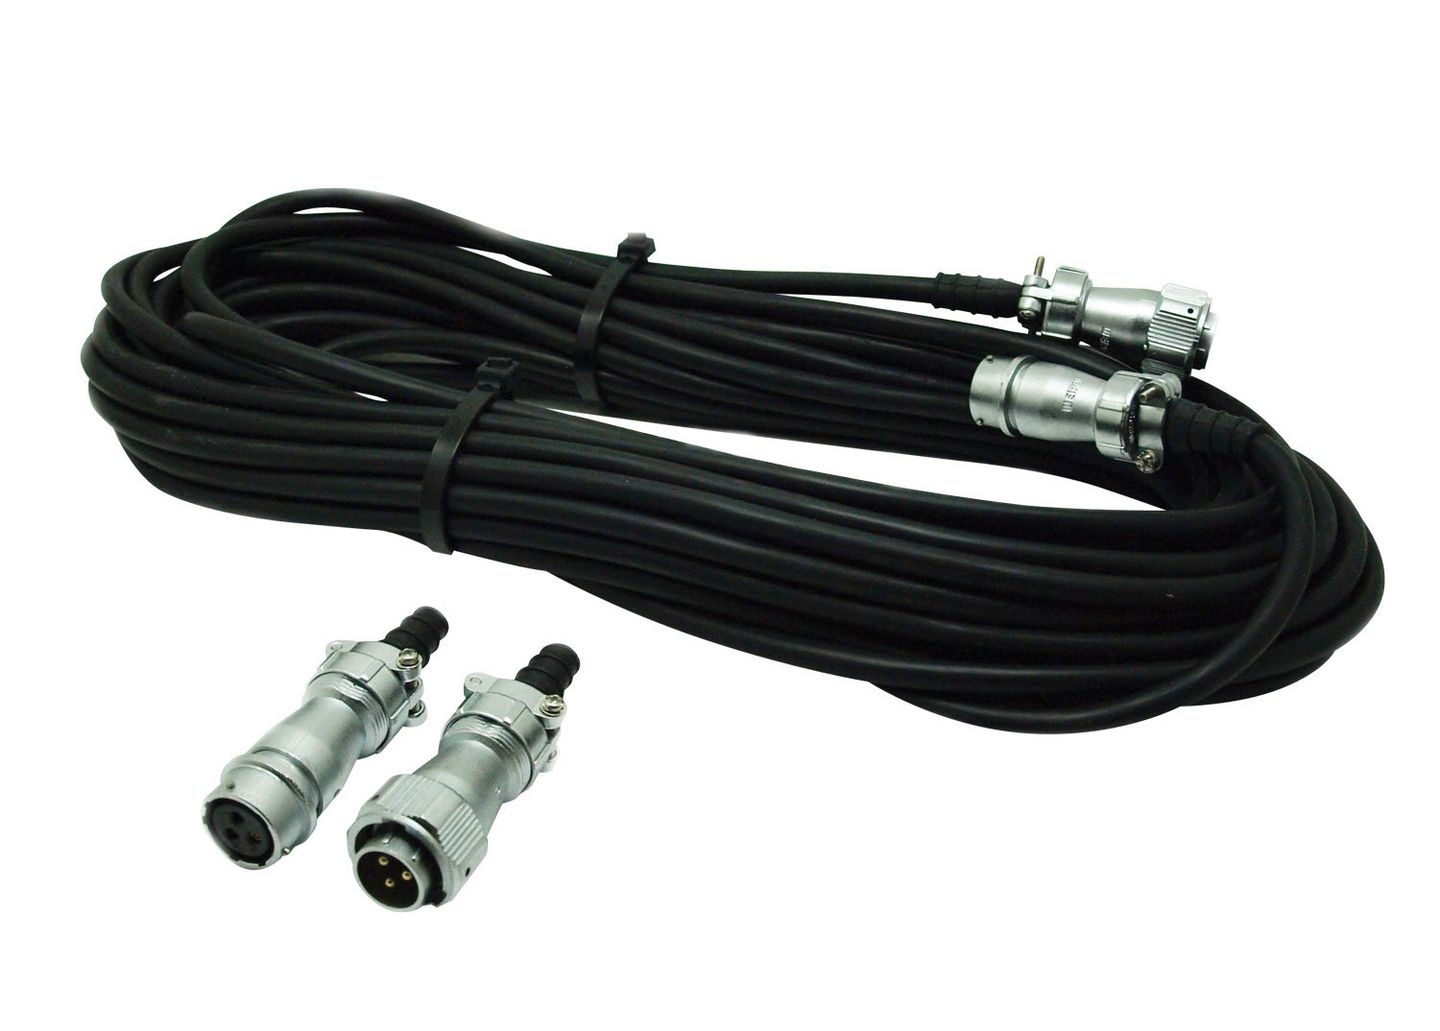 Power Cord Assemblies with Bayonet Type Cable Connectors